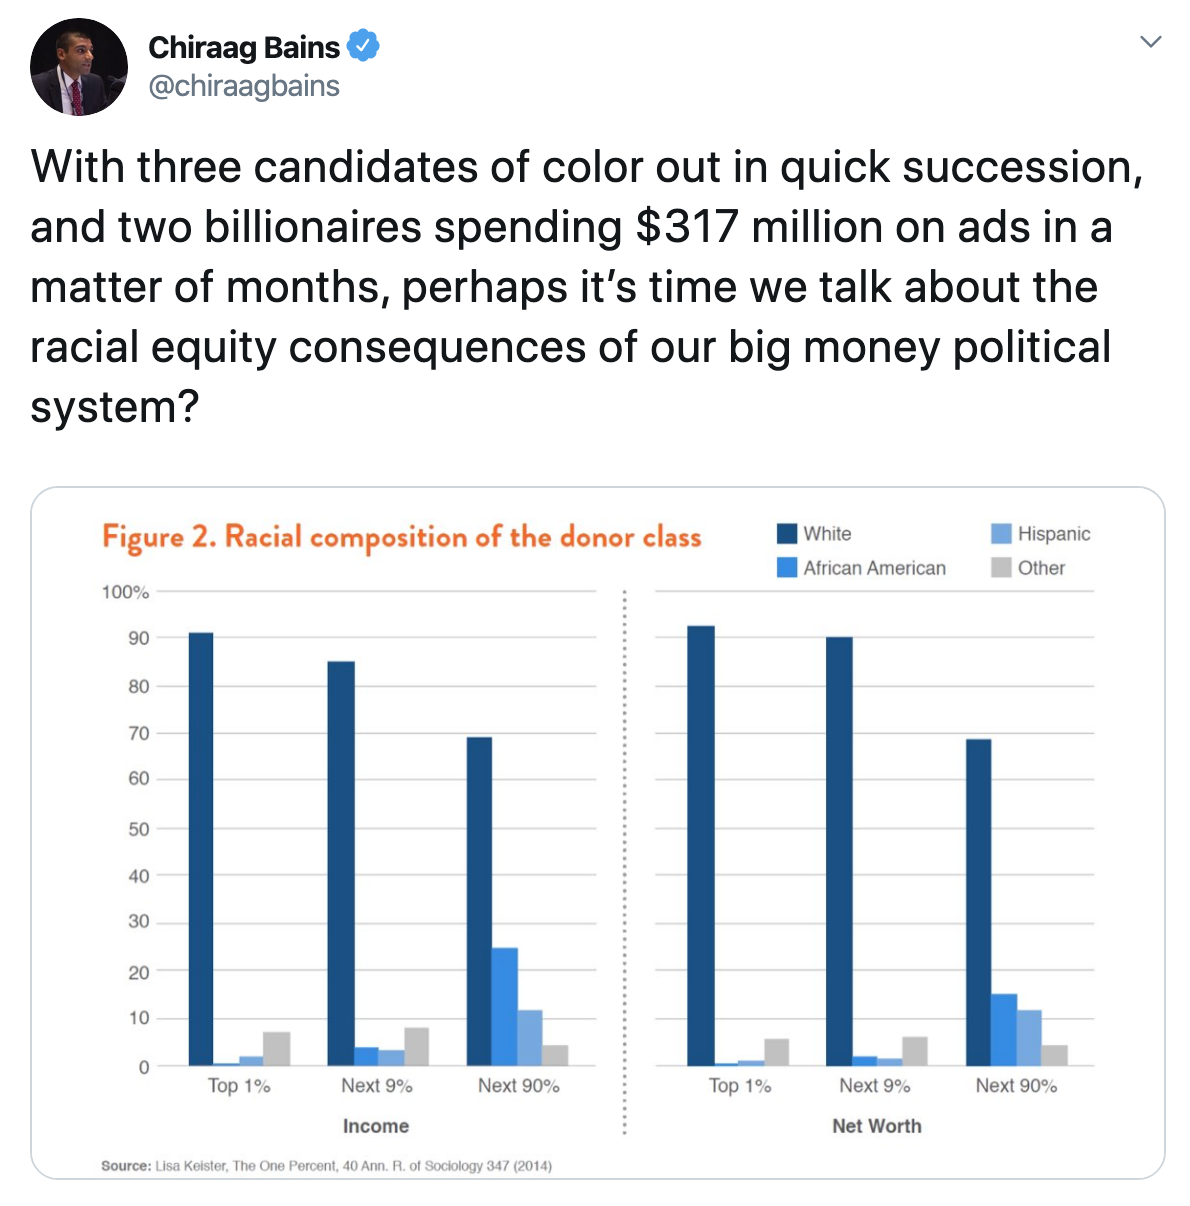 With three candidates of color out in quick succession, and two billionaires spending $317 million on ads in a matter of months, perhaps its time we talk about the racial equity consequences of our big money political system?   Chiraag Bains